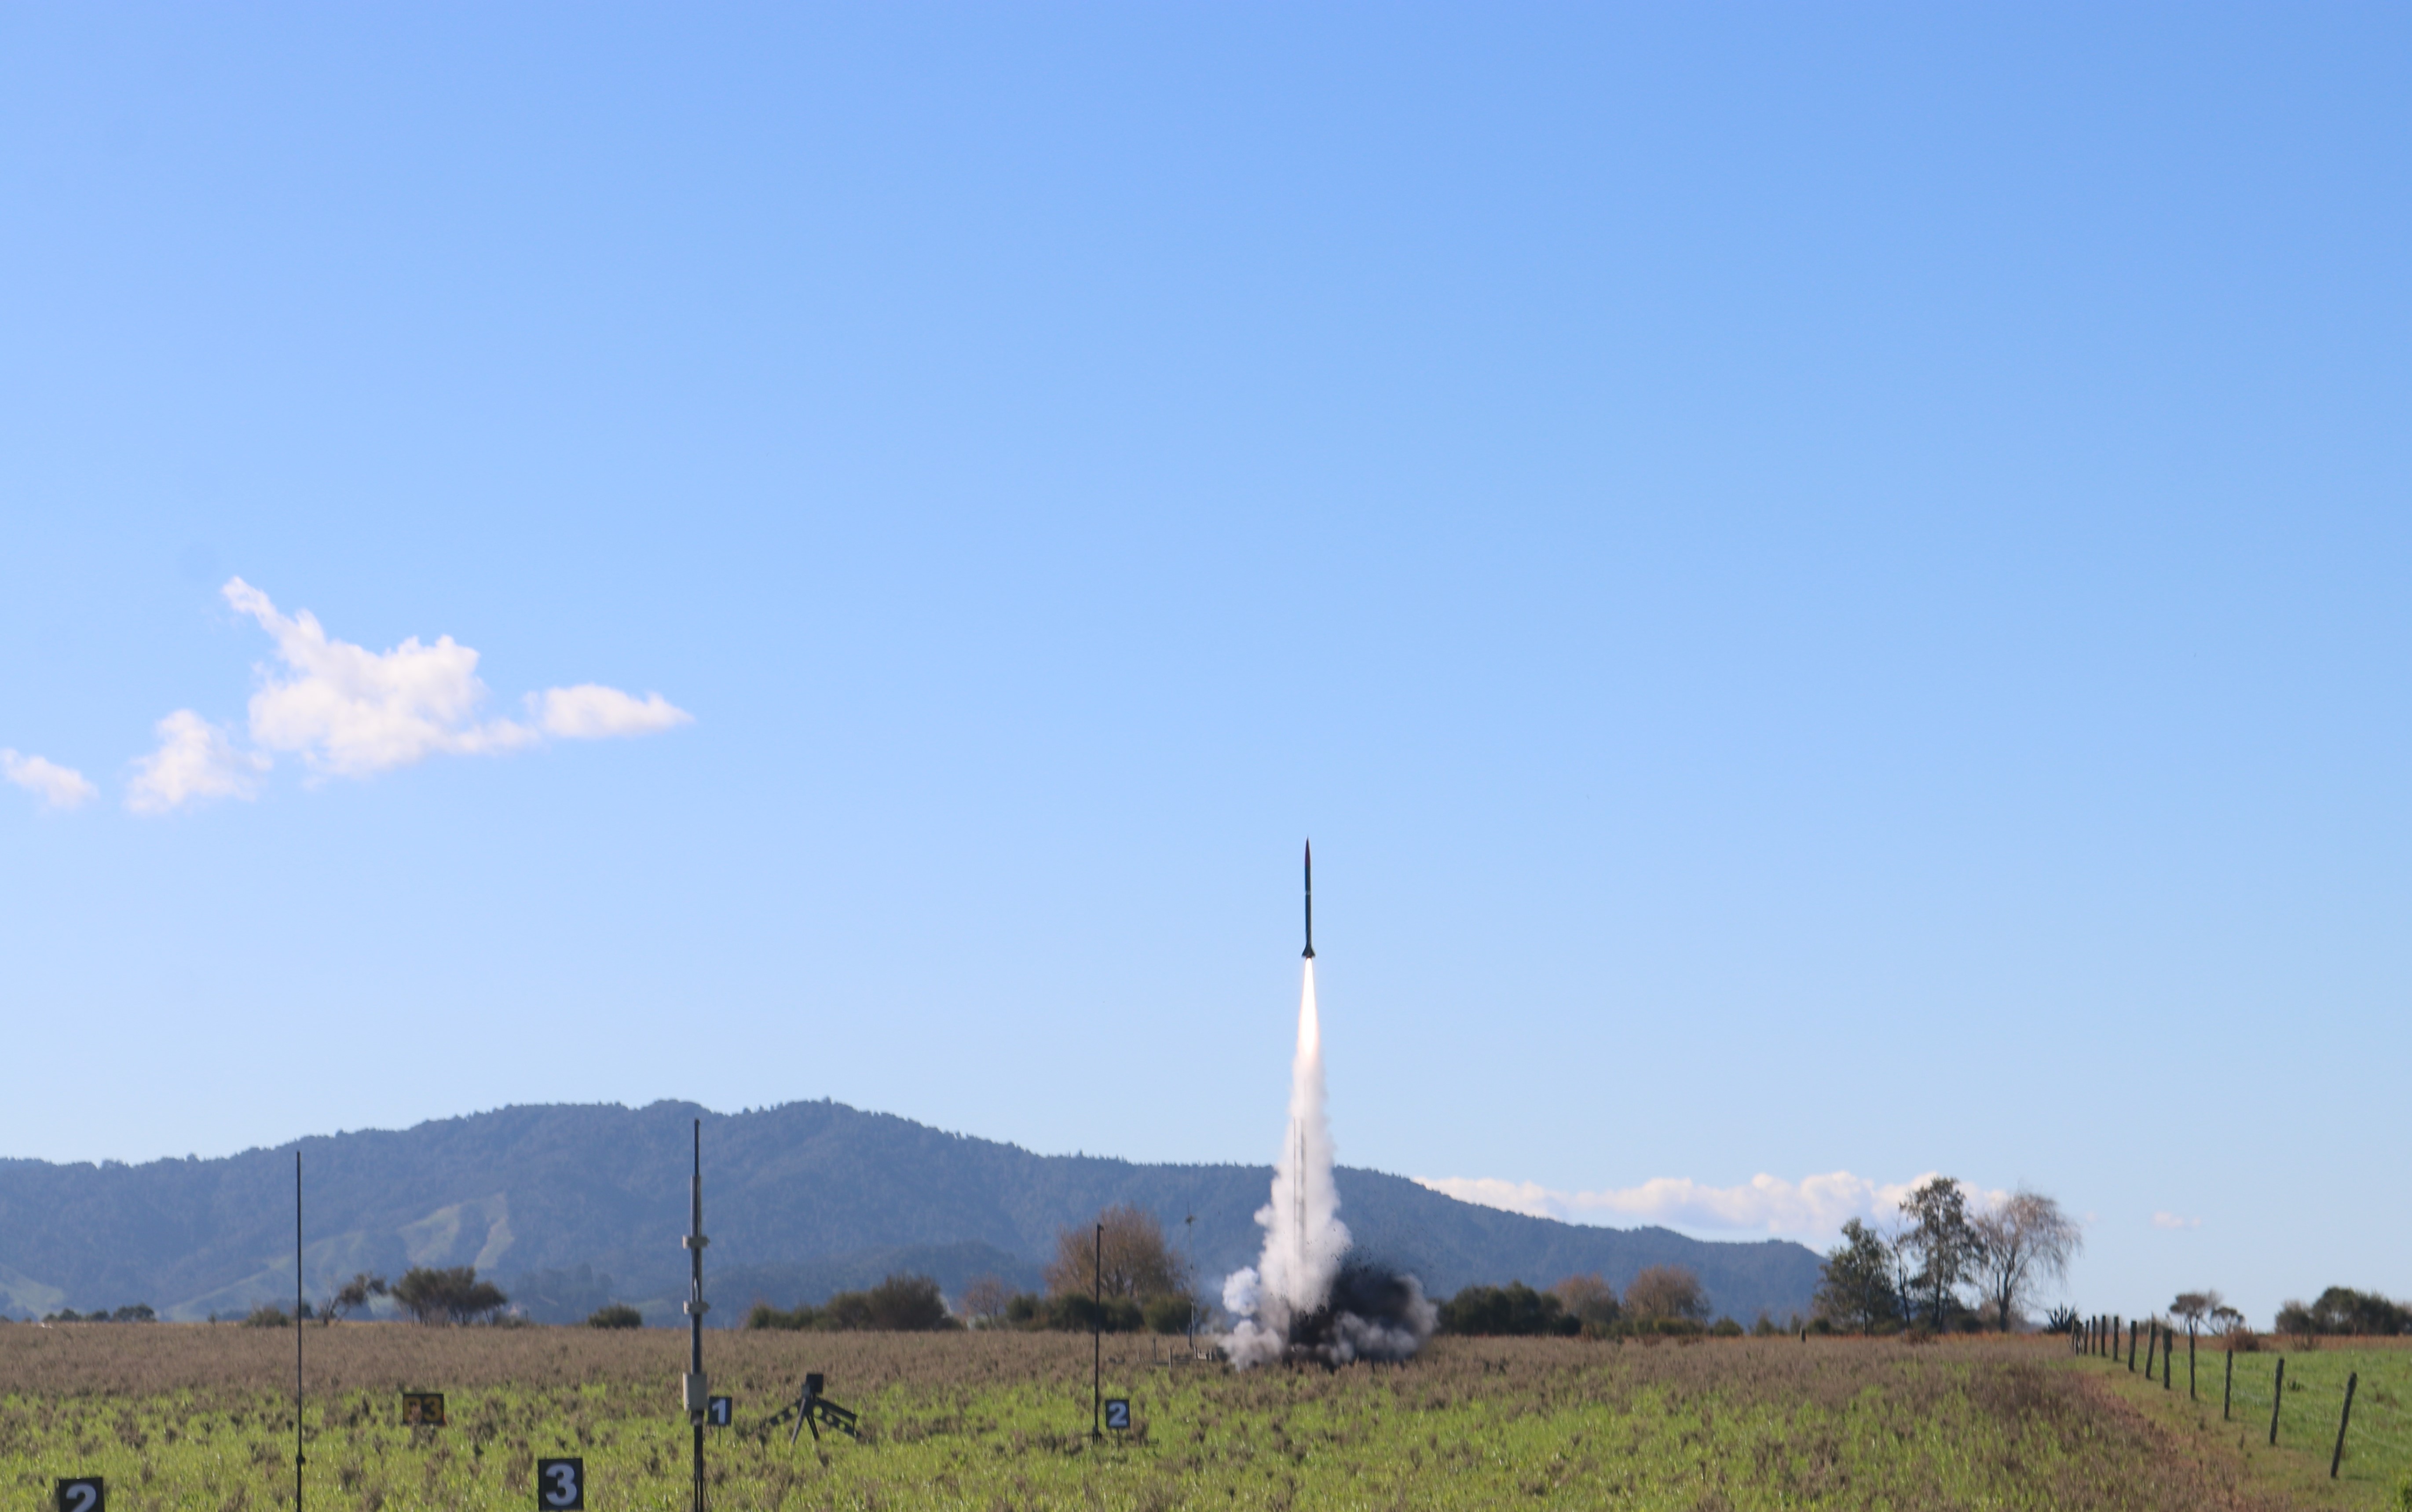 The new Team UC rocket, named Kārearea, successfully flies on its first test launch. 